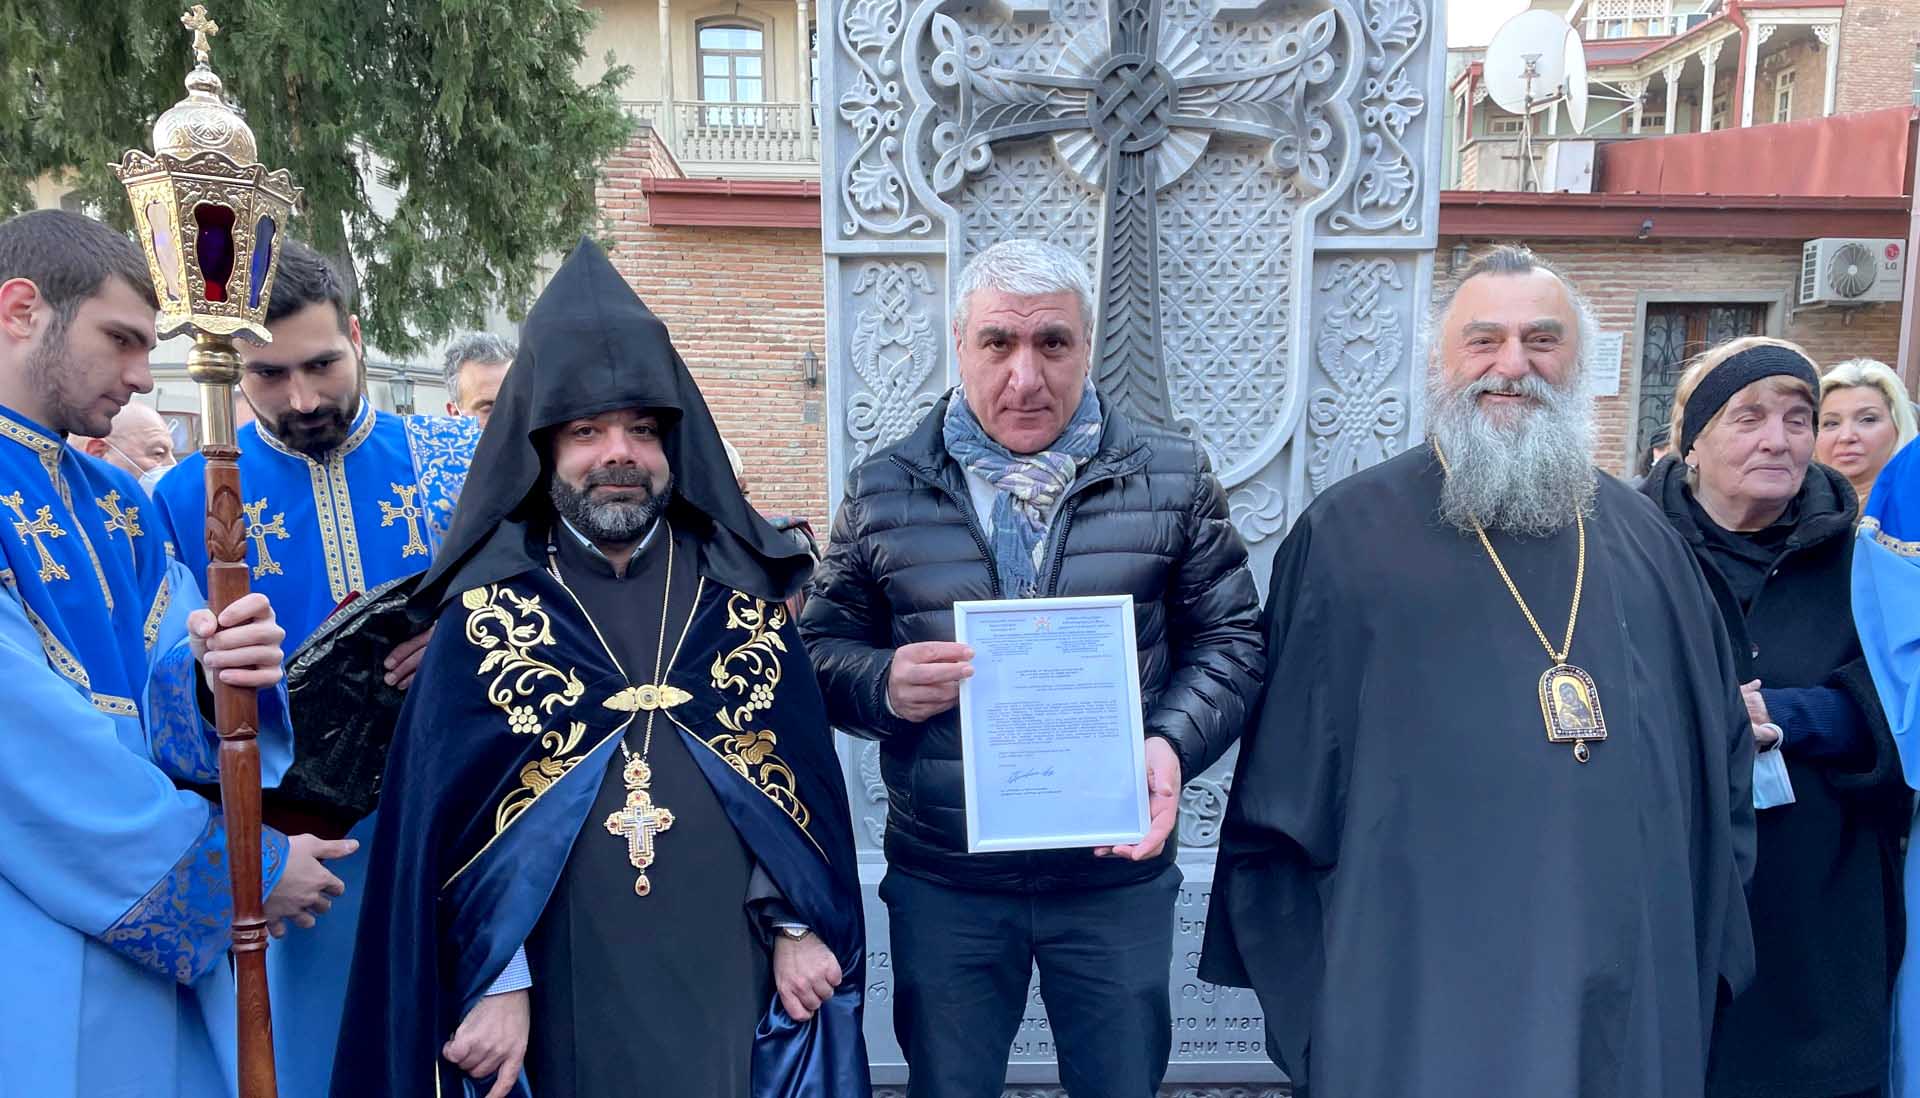 Opening of a cross-stone (khachkar) dedicated to fathers and mothers in Saint George church in Tbilisi